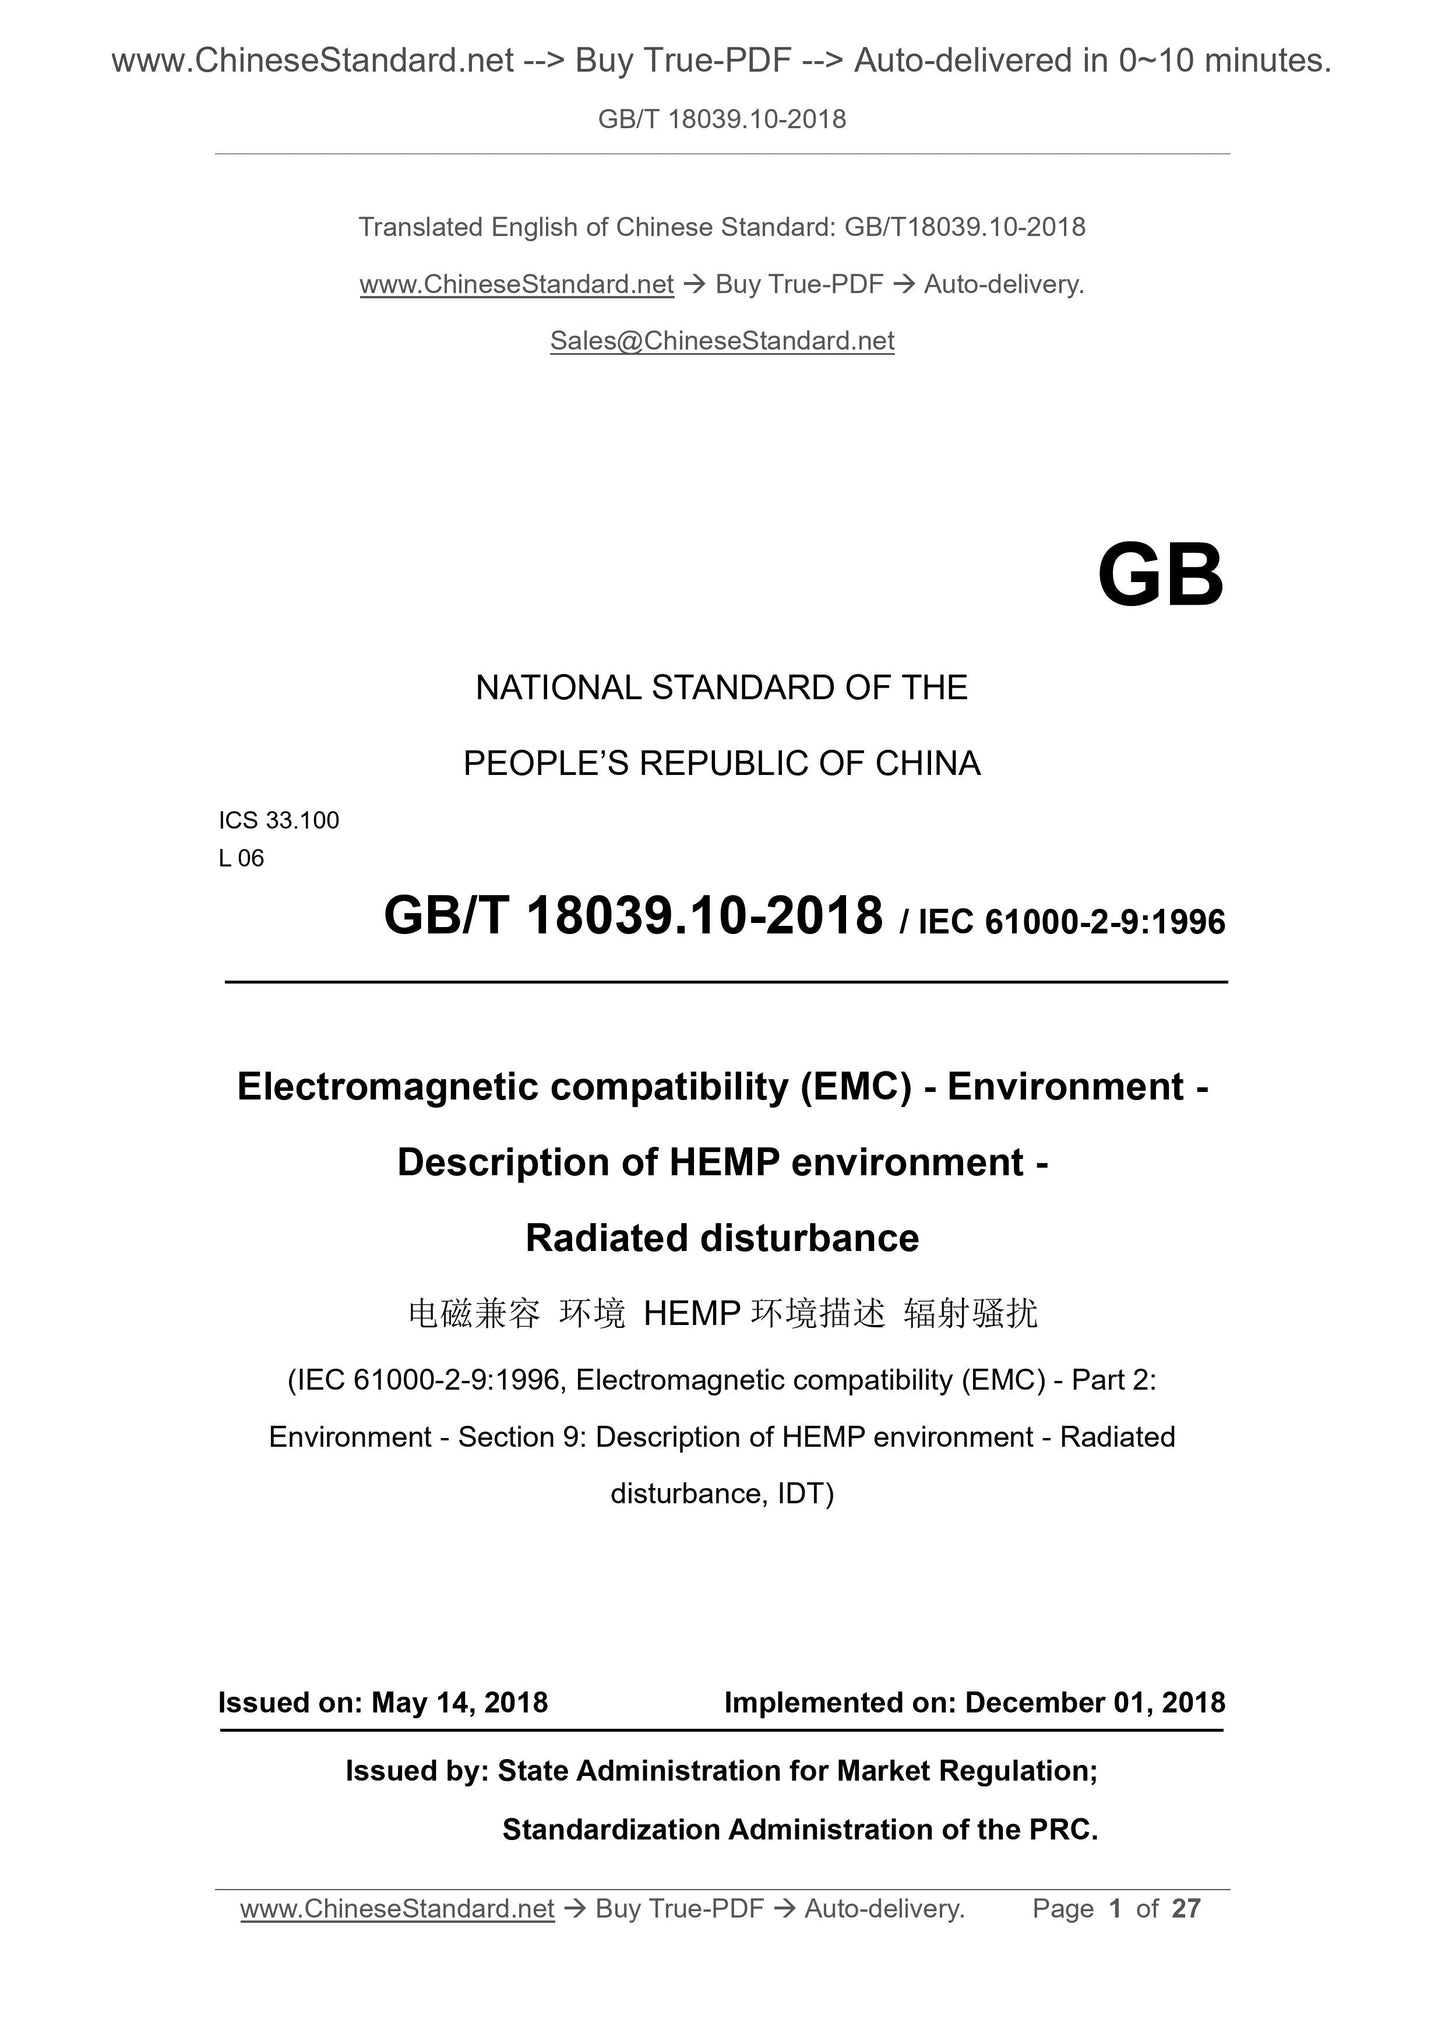 GB/T 18039.10-2018 Page 1